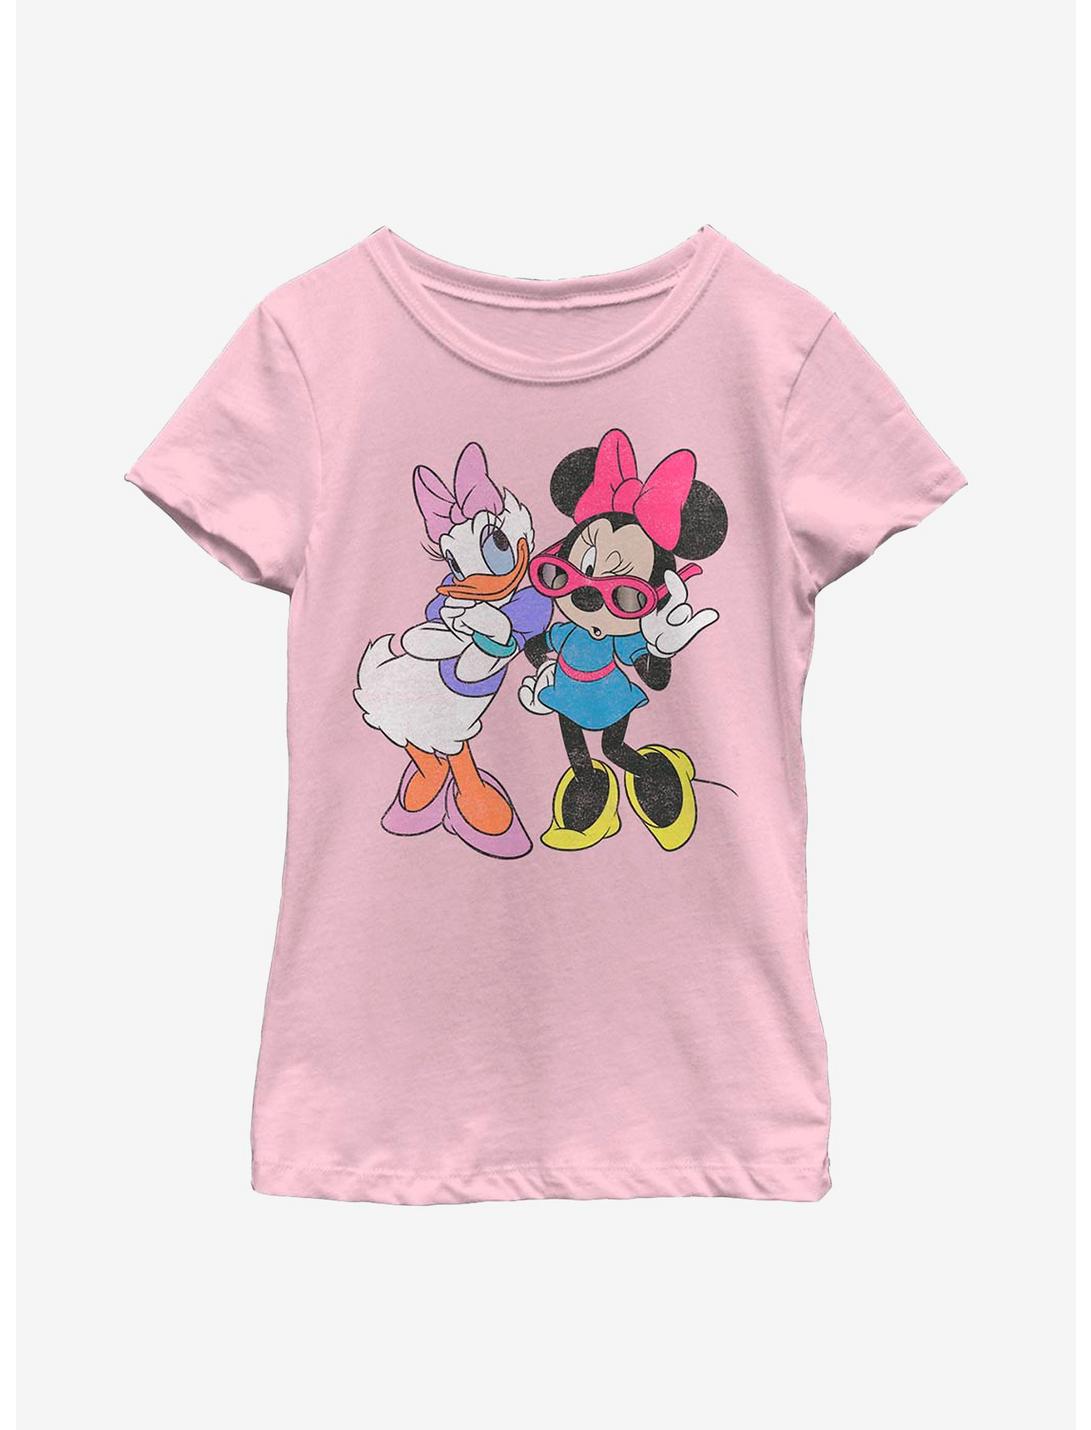 Disney Minnie Mouse Just Girls Youth Girls T-Shirt, PINK, hi-res